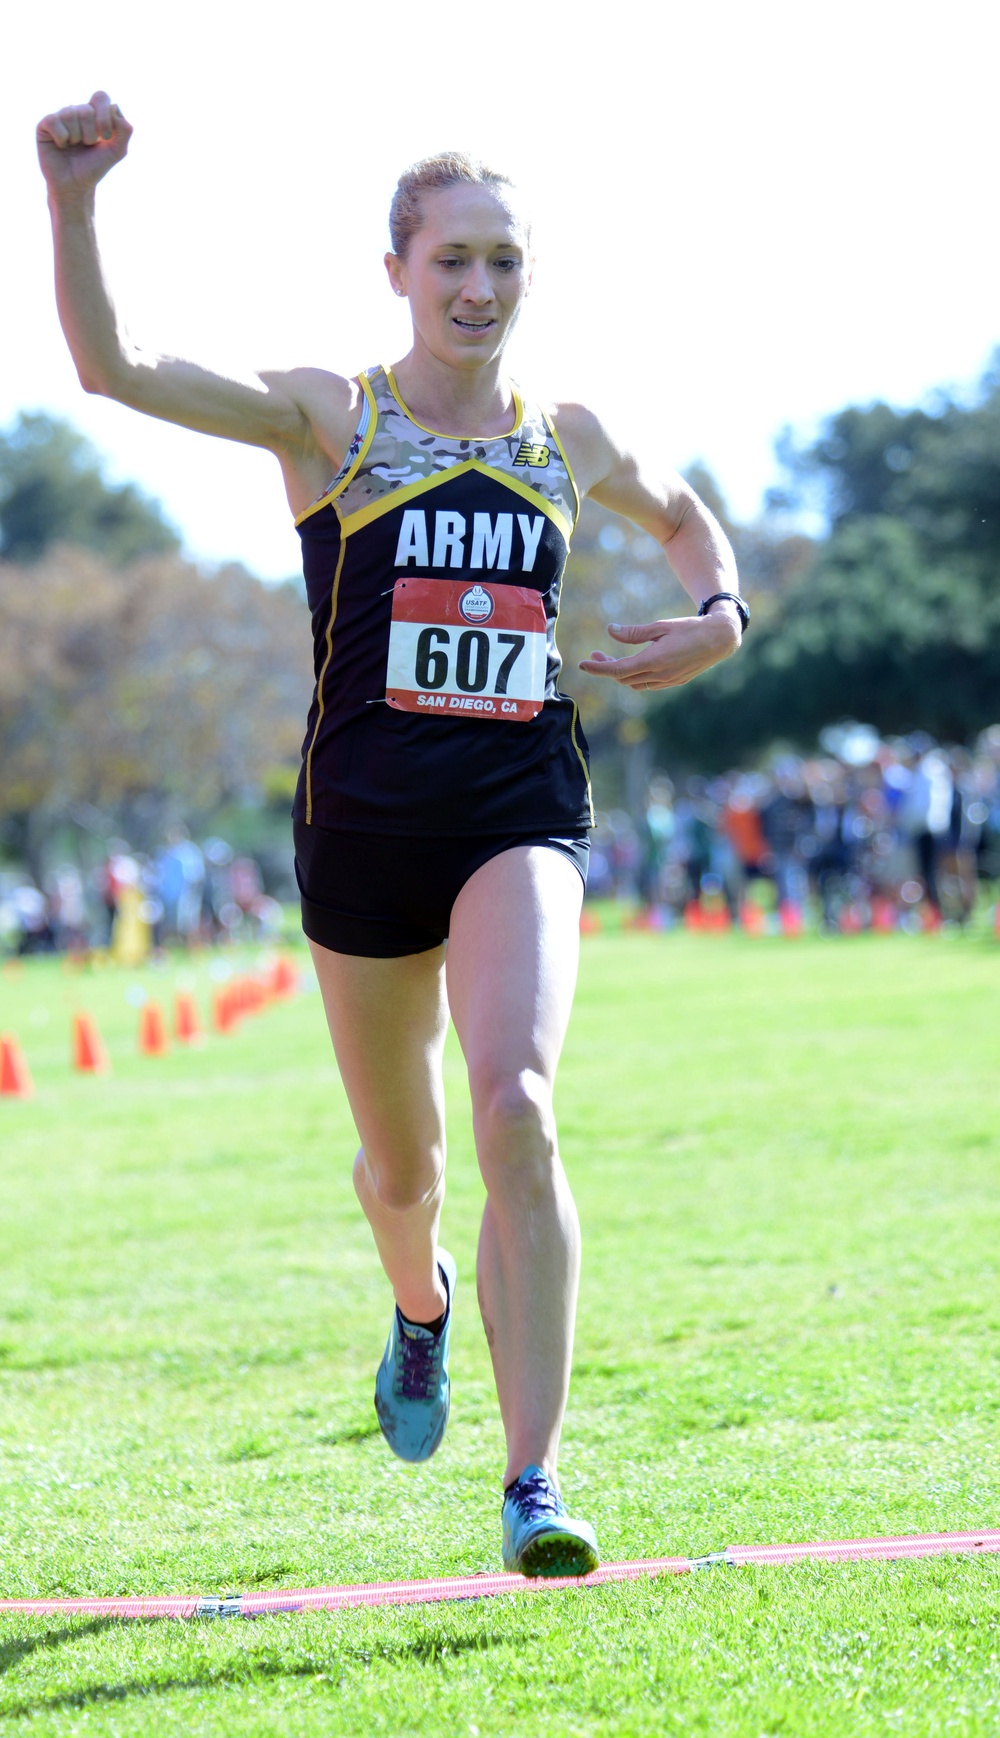 Army wins Armed Forces Cross Country Championship